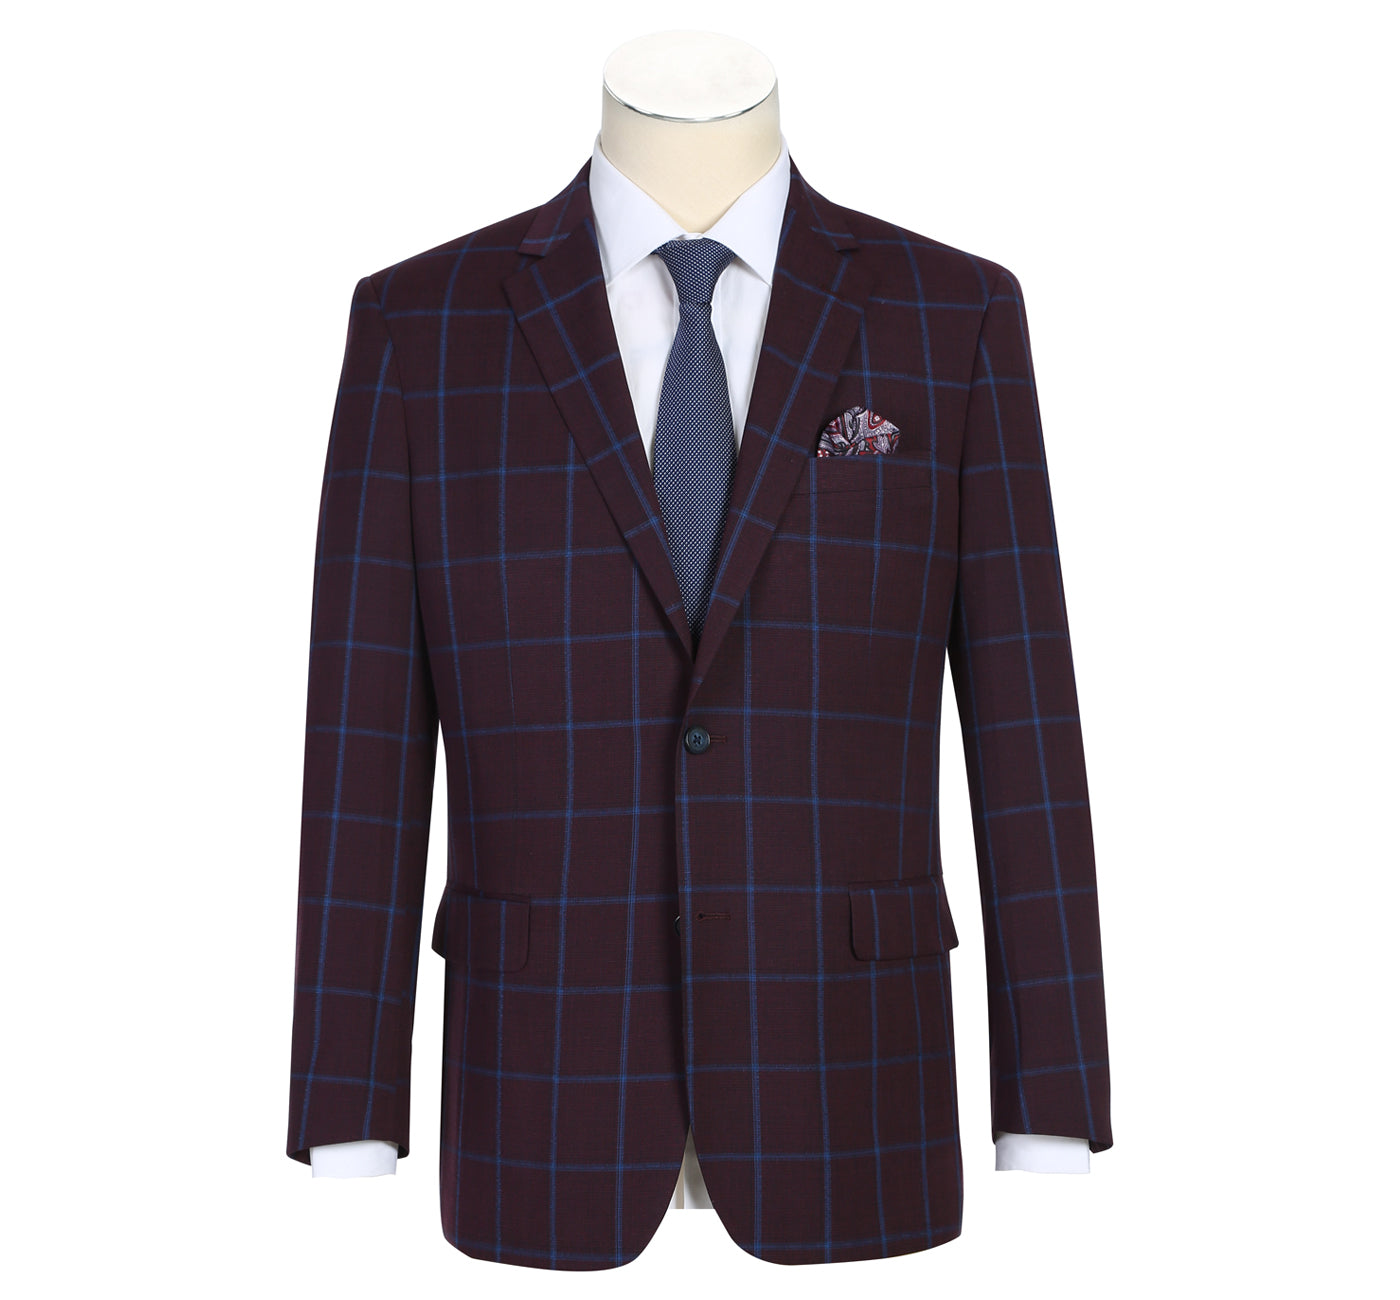 294-6 Men's Slim Fit Two Button Burgundy with Blue Check Sportscoat